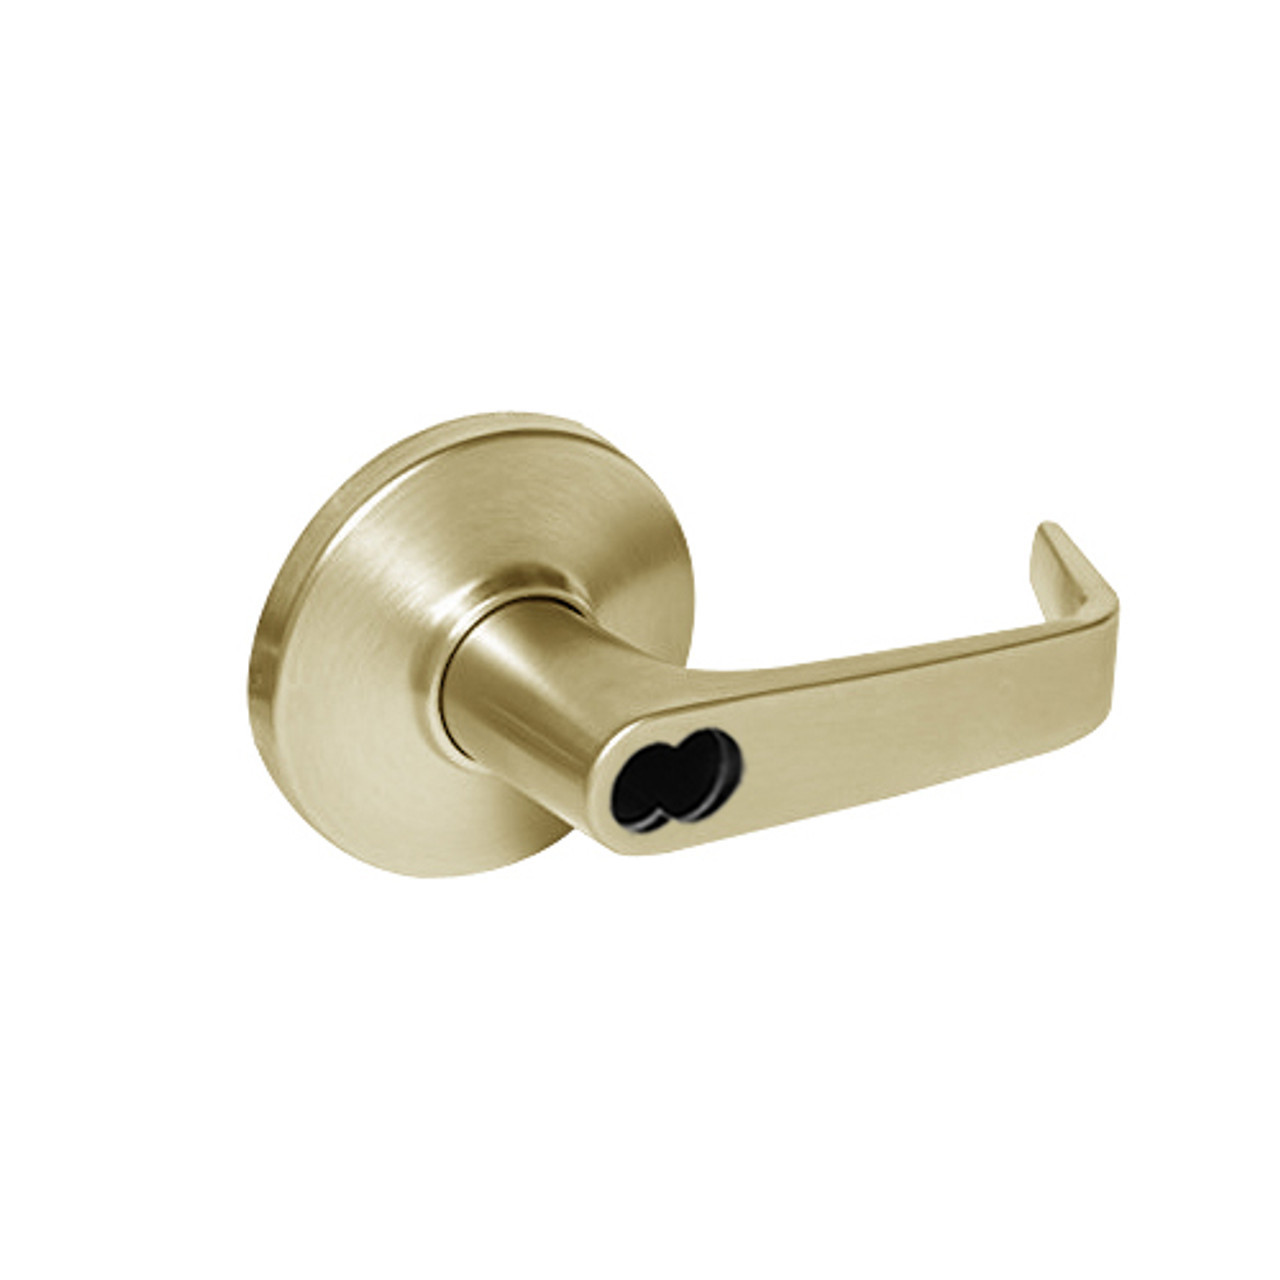 9K37RD15DSTK606LM Best 9K Series Special Function Cylindrical Lever Locks with Contour Angle with Return Lever Design Accept 7 Pin Best Core in Satin Brass